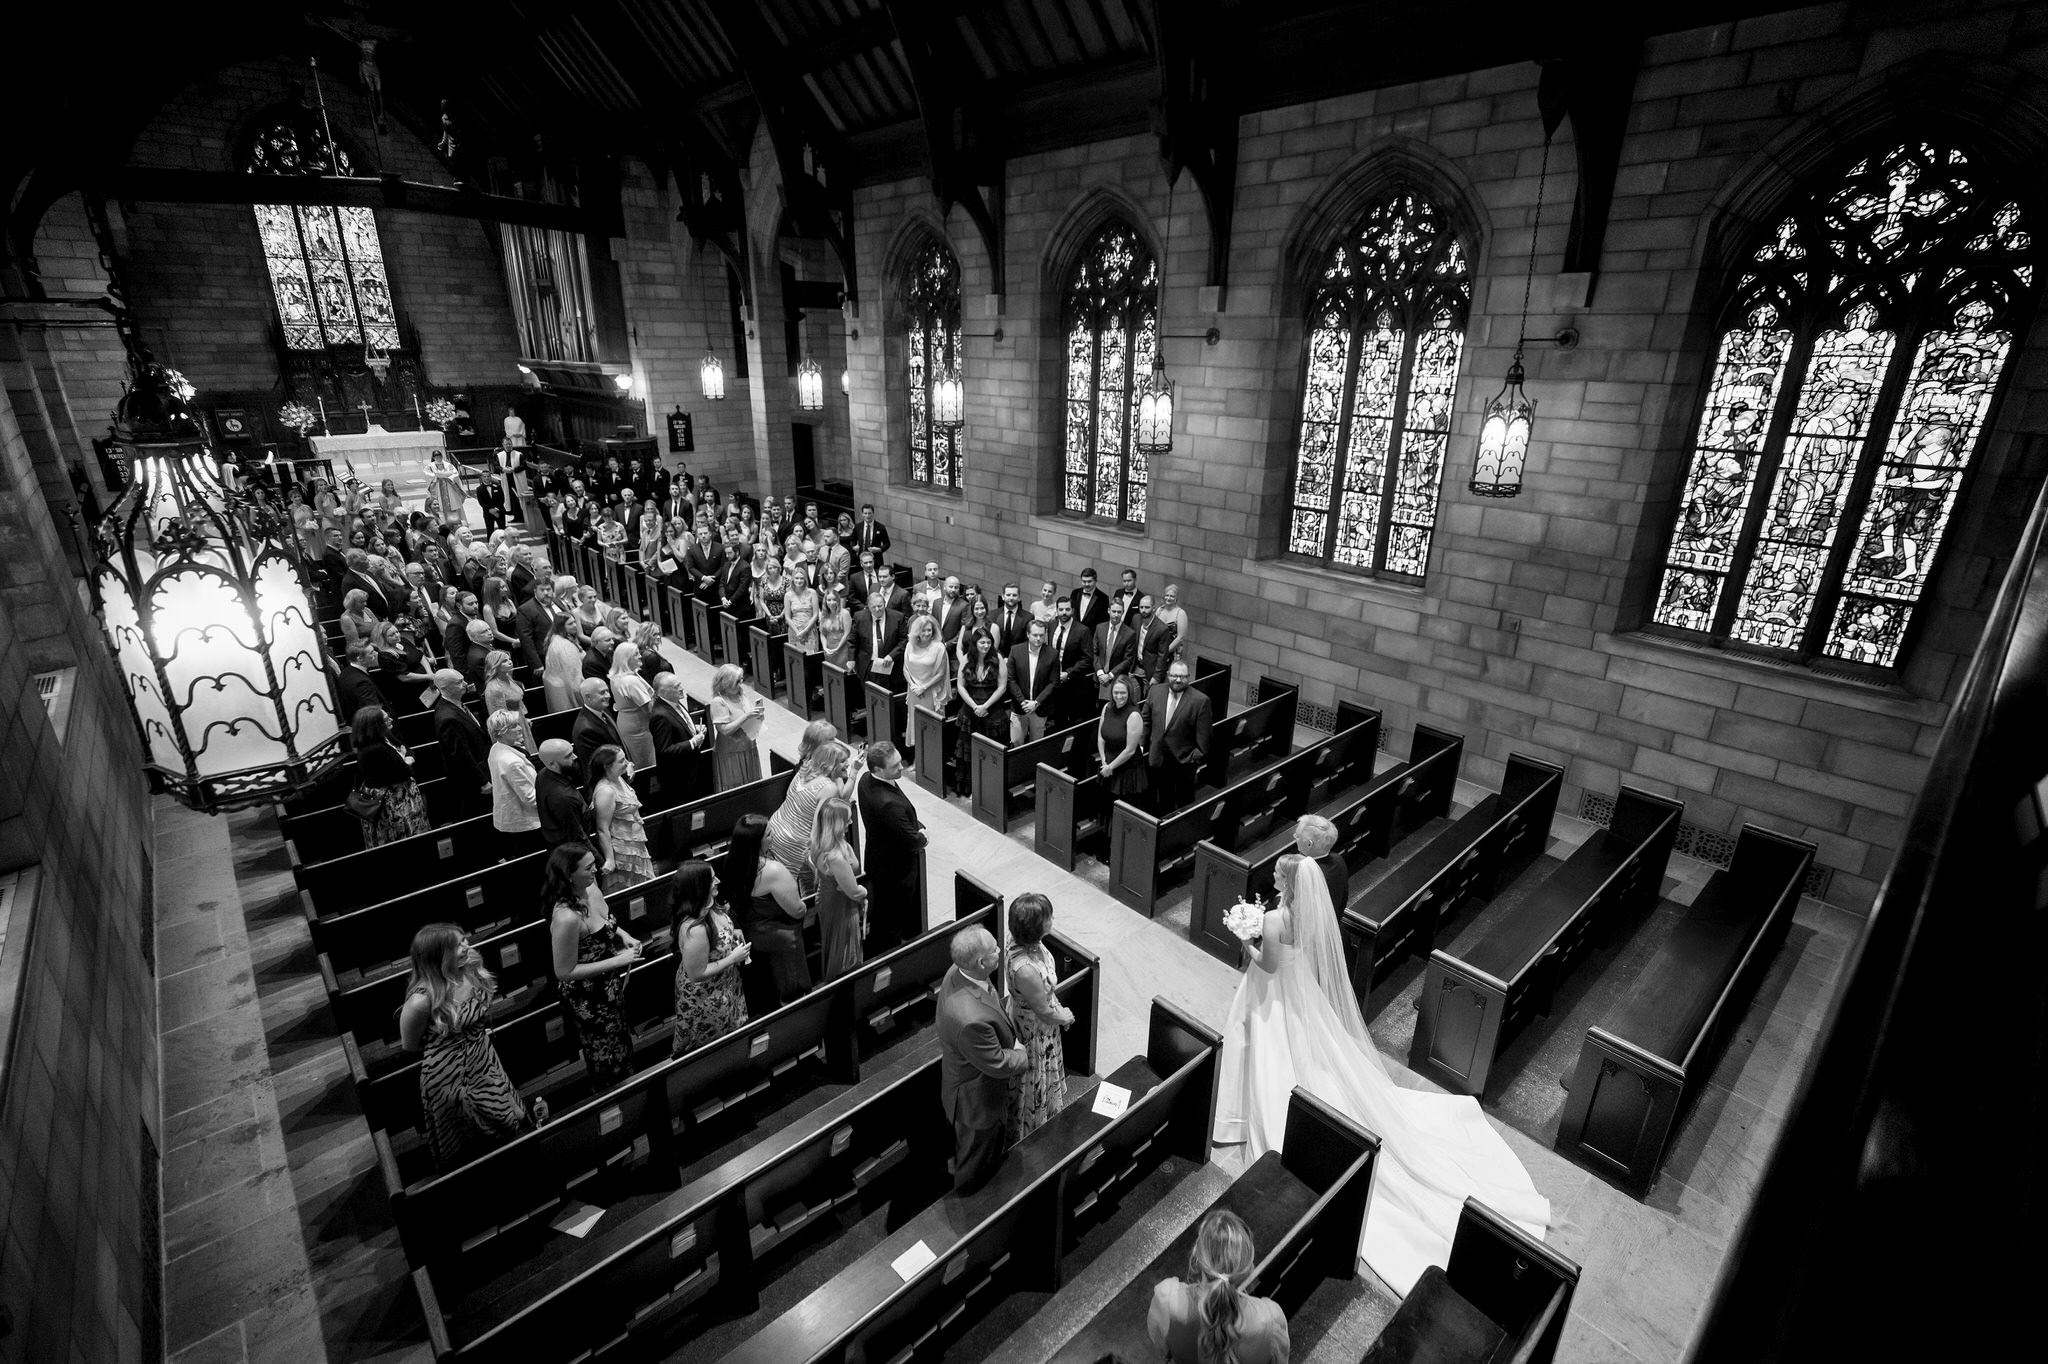 The bride walks down their aisle with her father at Christ Church Grosse Pointe wedding.  